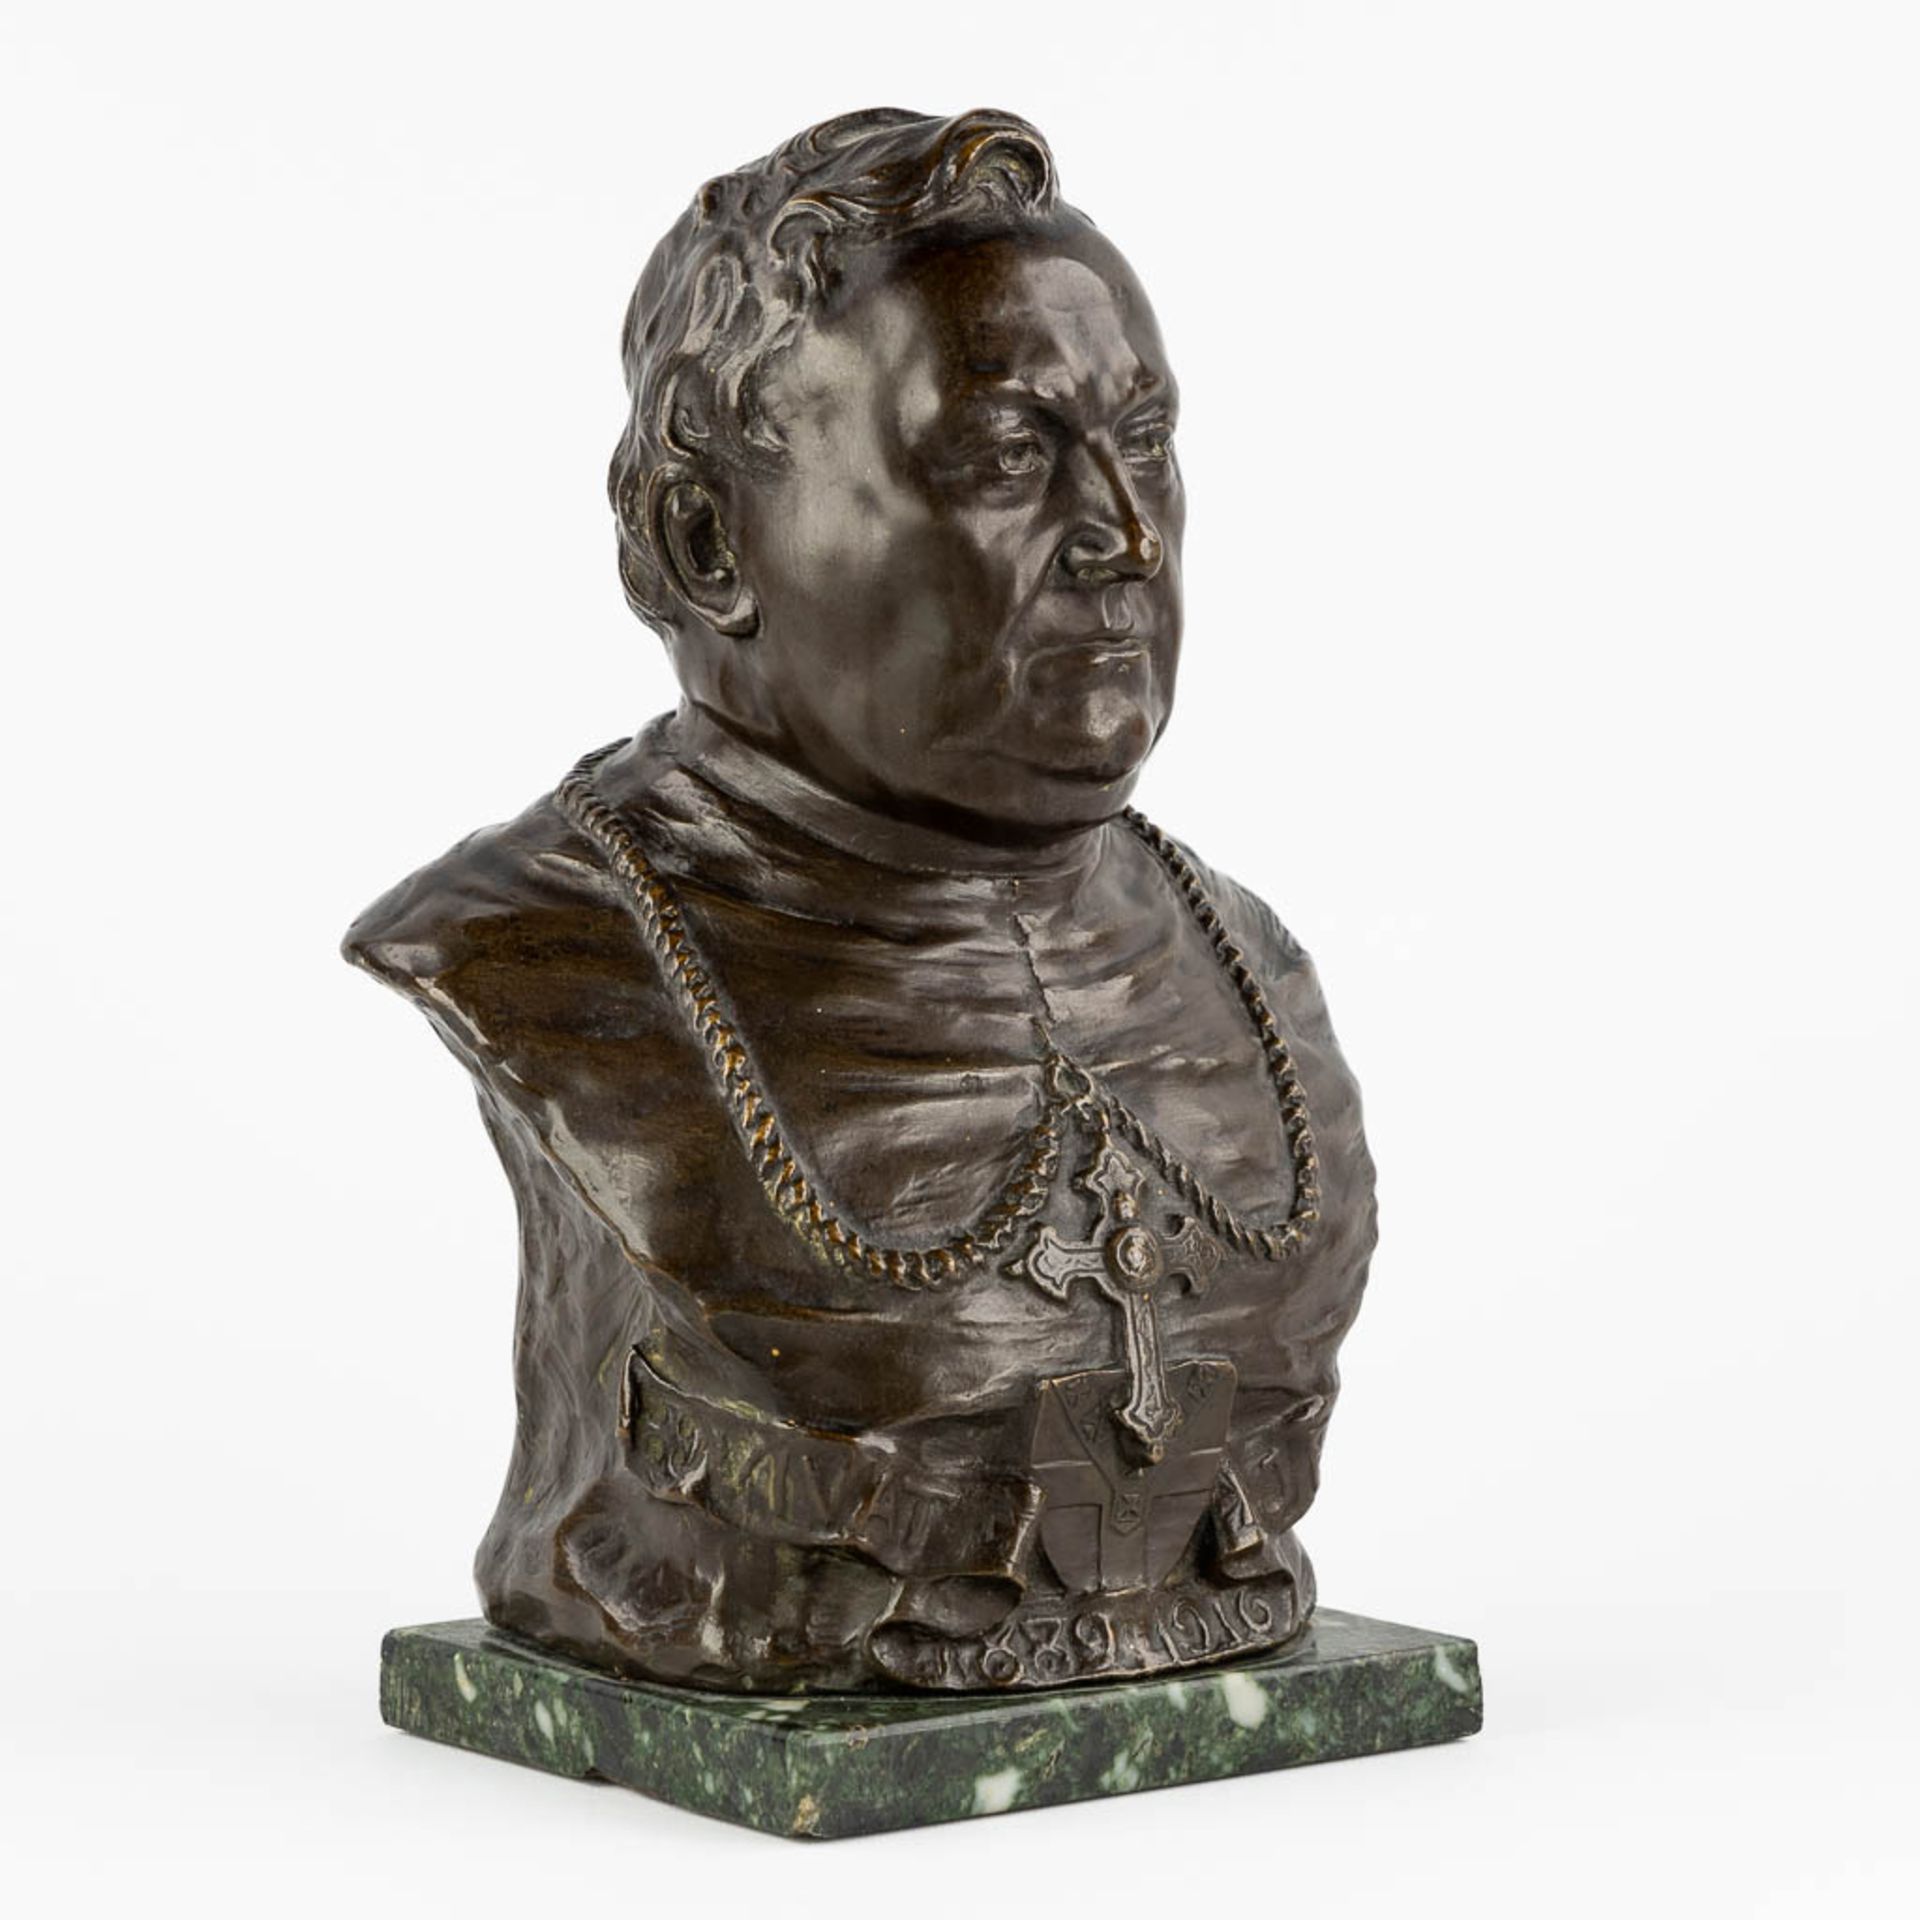 Cyriel COUVREUR (1876-1929) A bust of 'Mgr. Stillemans, Bishop of Ghent, 1889-1916', foundry mark by - Image 3 of 12